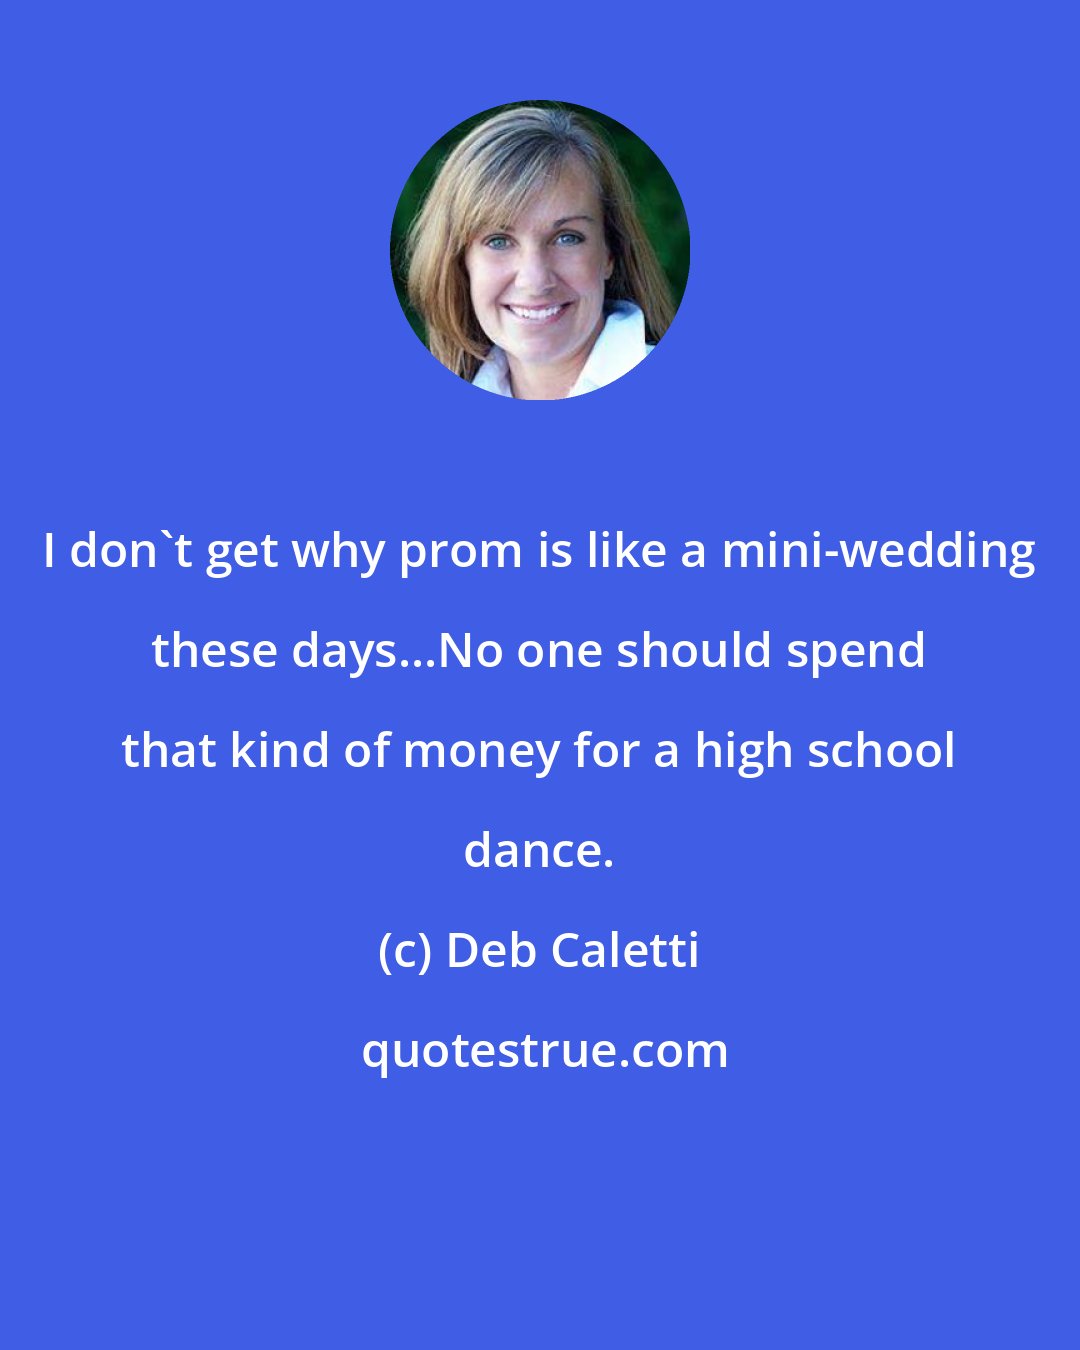 Deb Caletti: I don't get why prom is like a mini-wedding these days...No one should spend that kind of money for a high school dance.